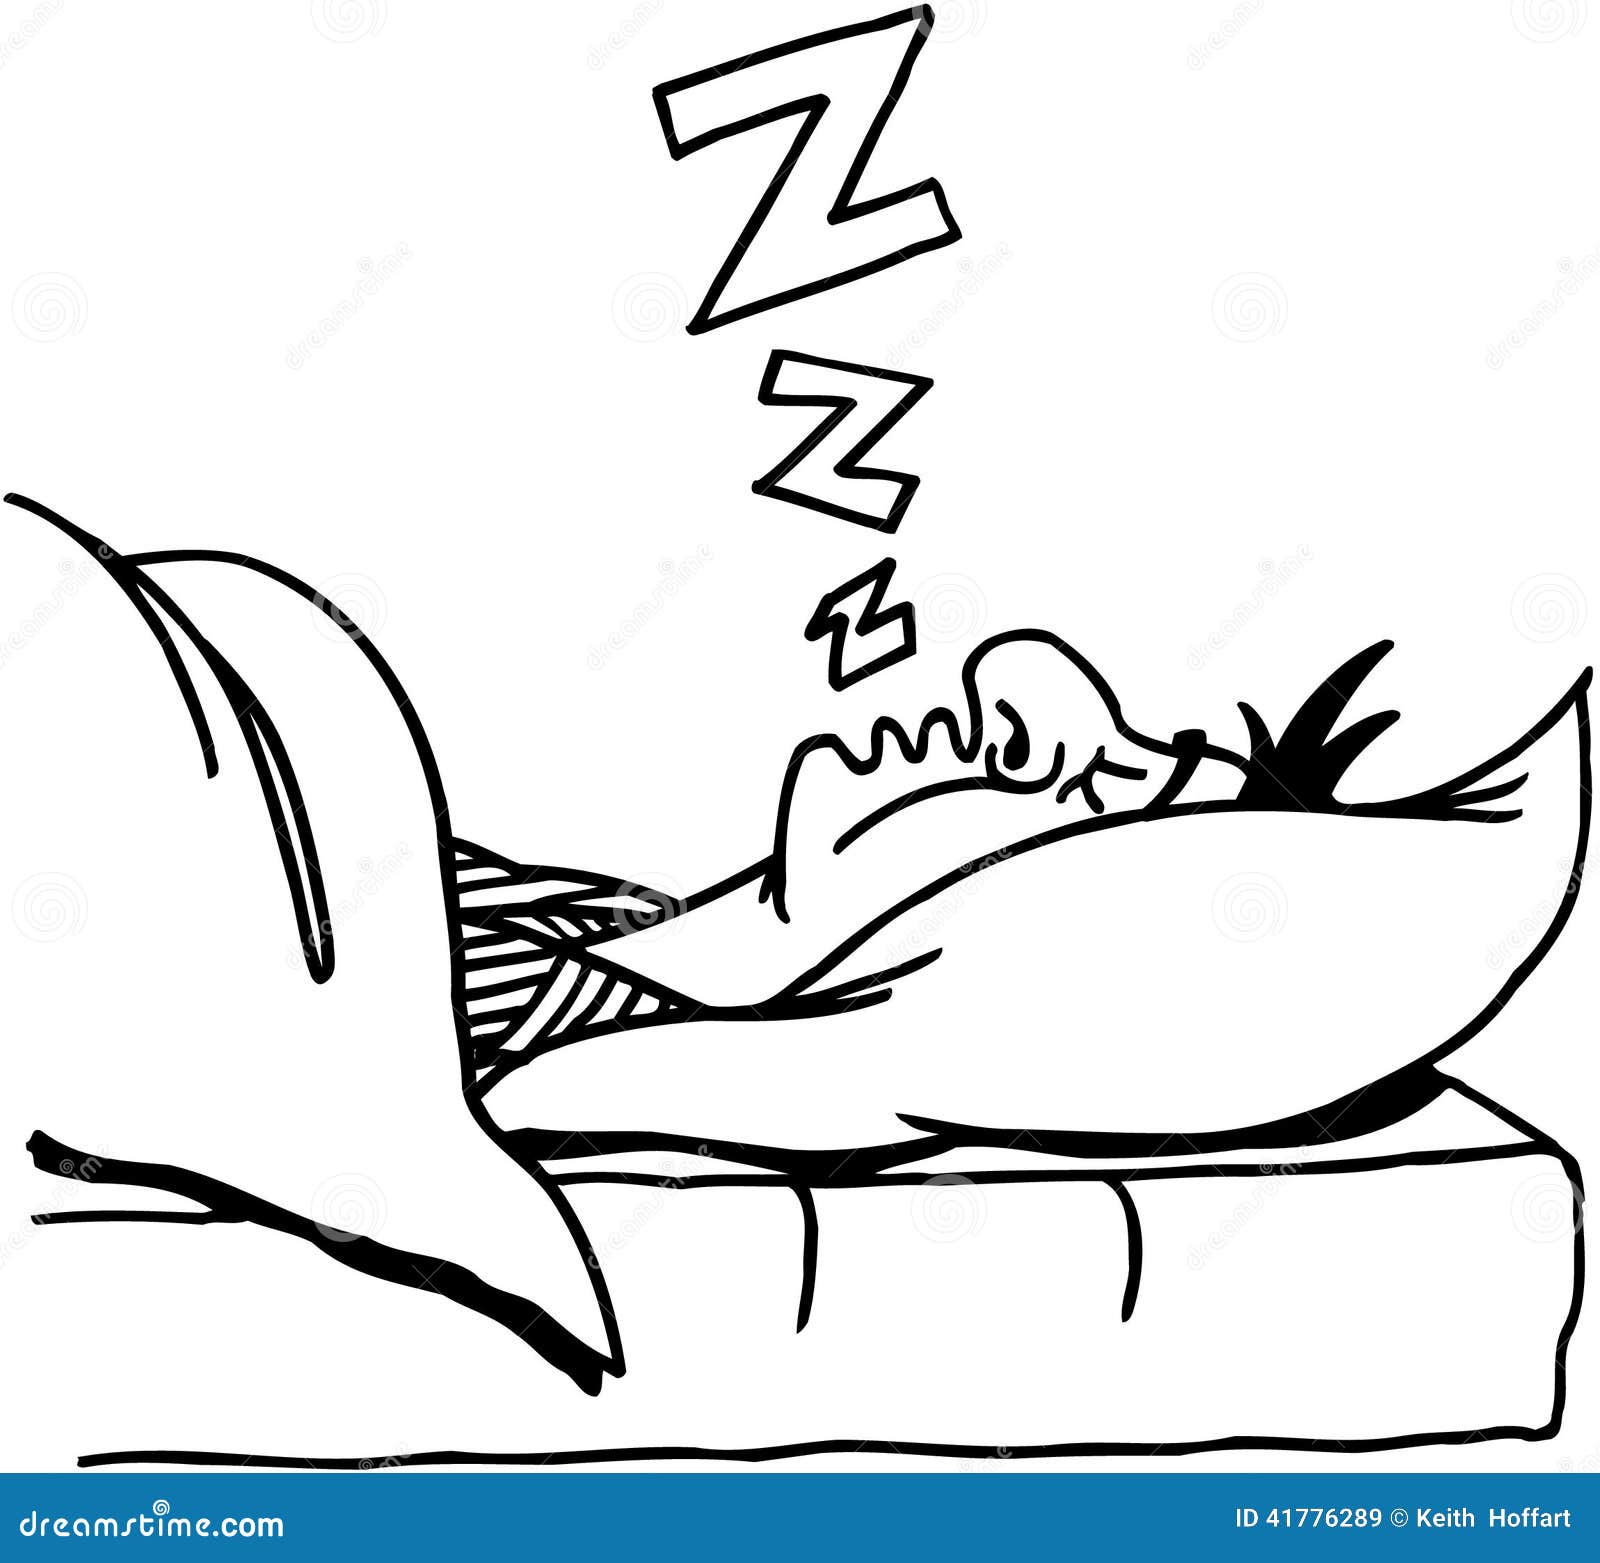 clipart man in bed - photo #45